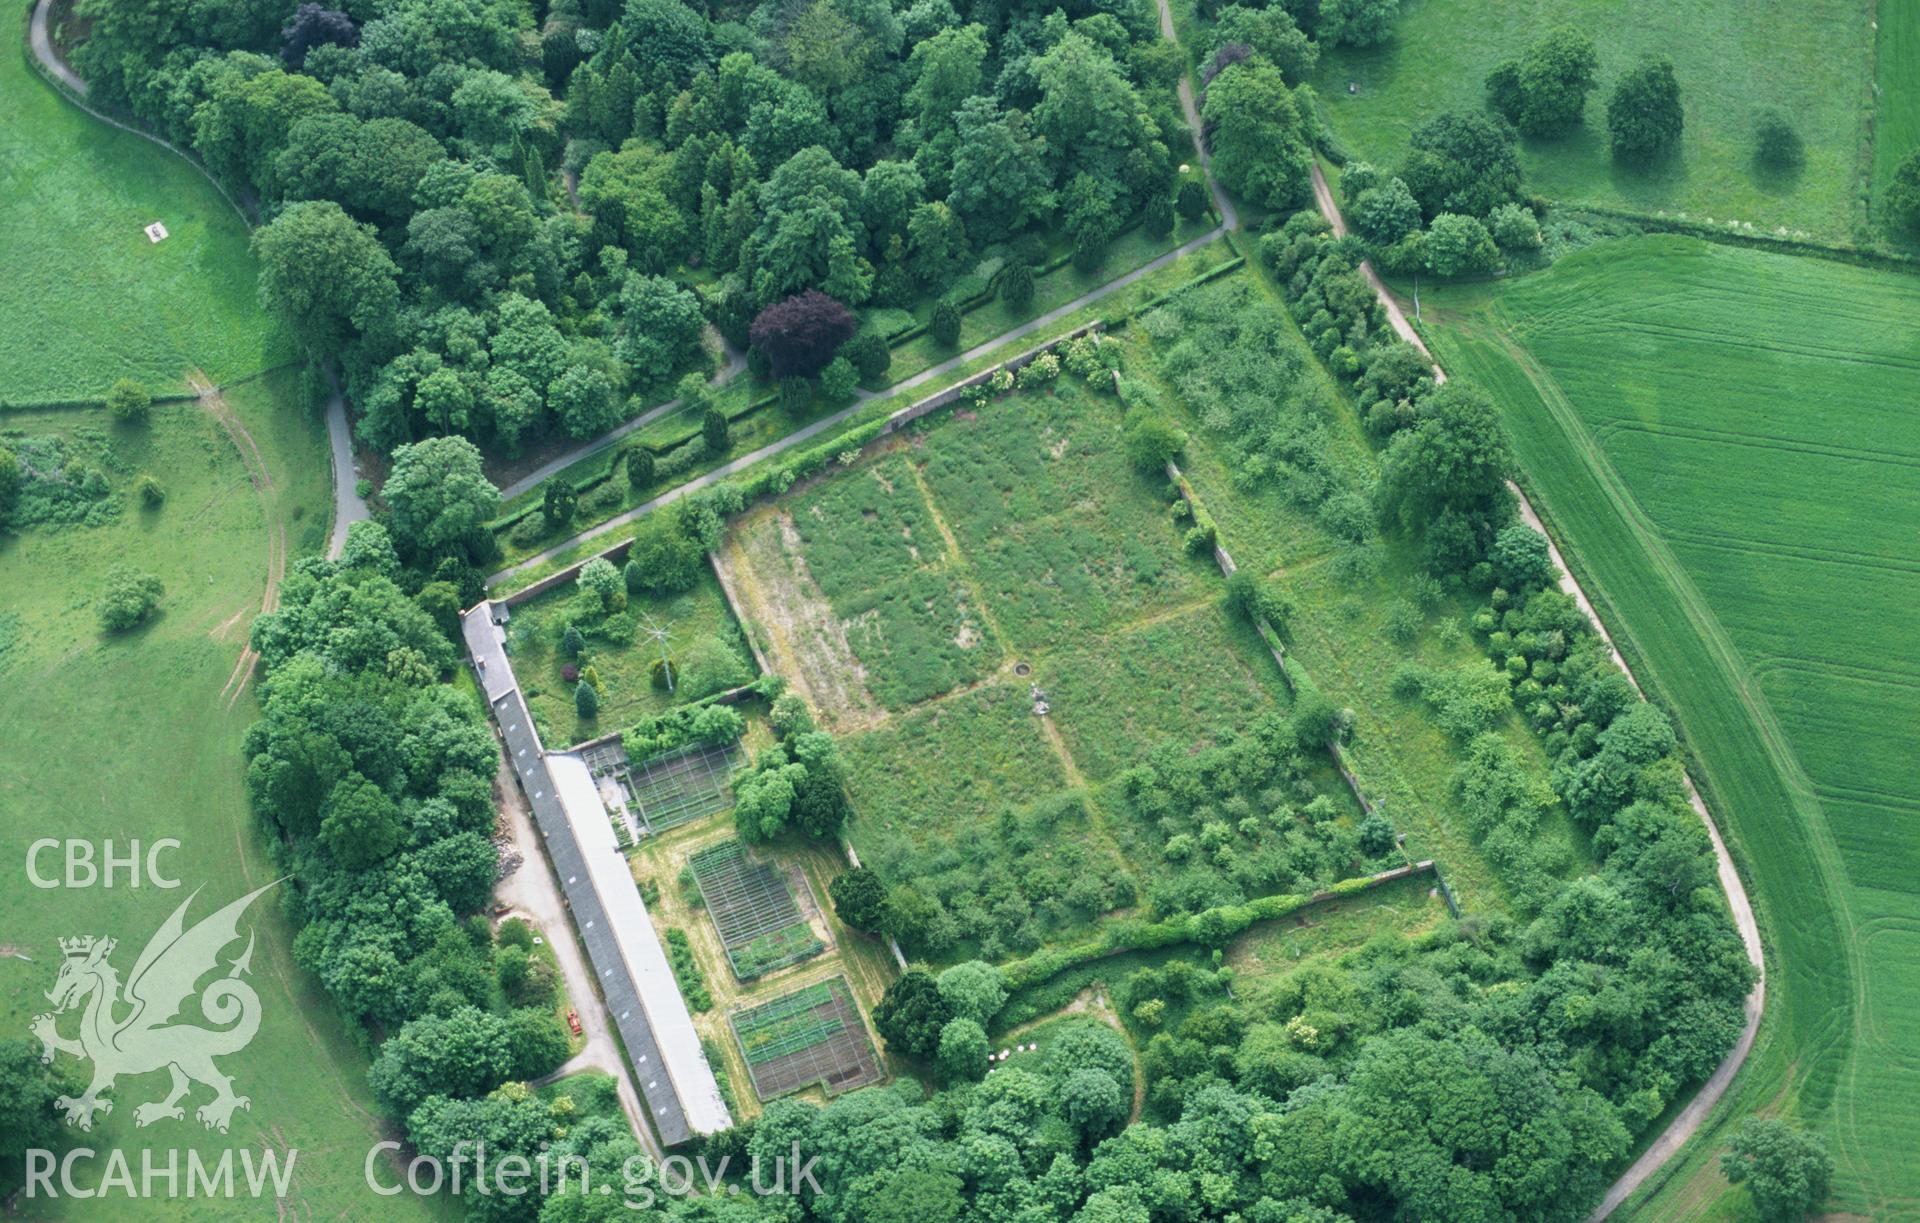 Slide of RCAHMW colour oblique aerial photograph of walled garden at Mostyn Hall taken by T.G. Driver, 2001.